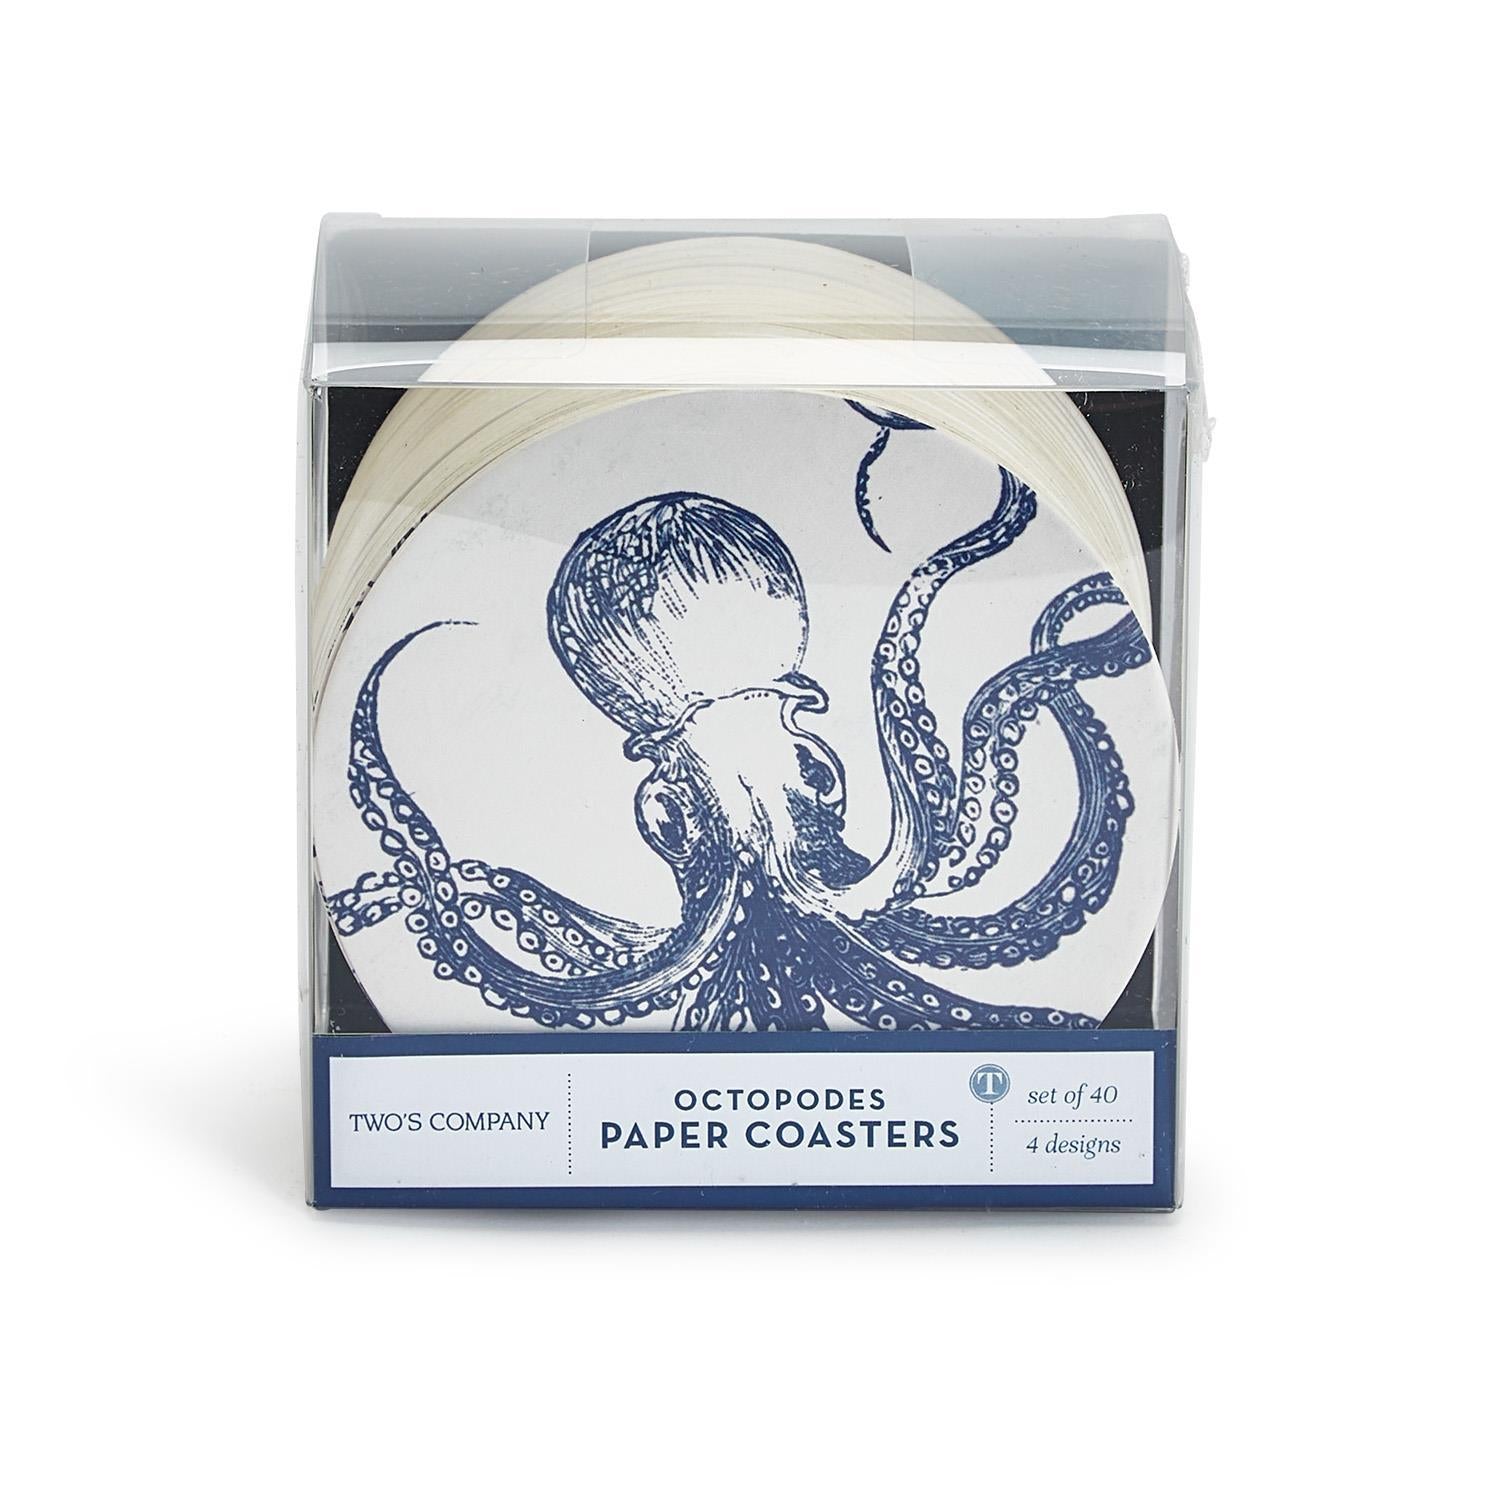 Octopi Set of 40 Heavyweight Paper Coasters in Gift Box